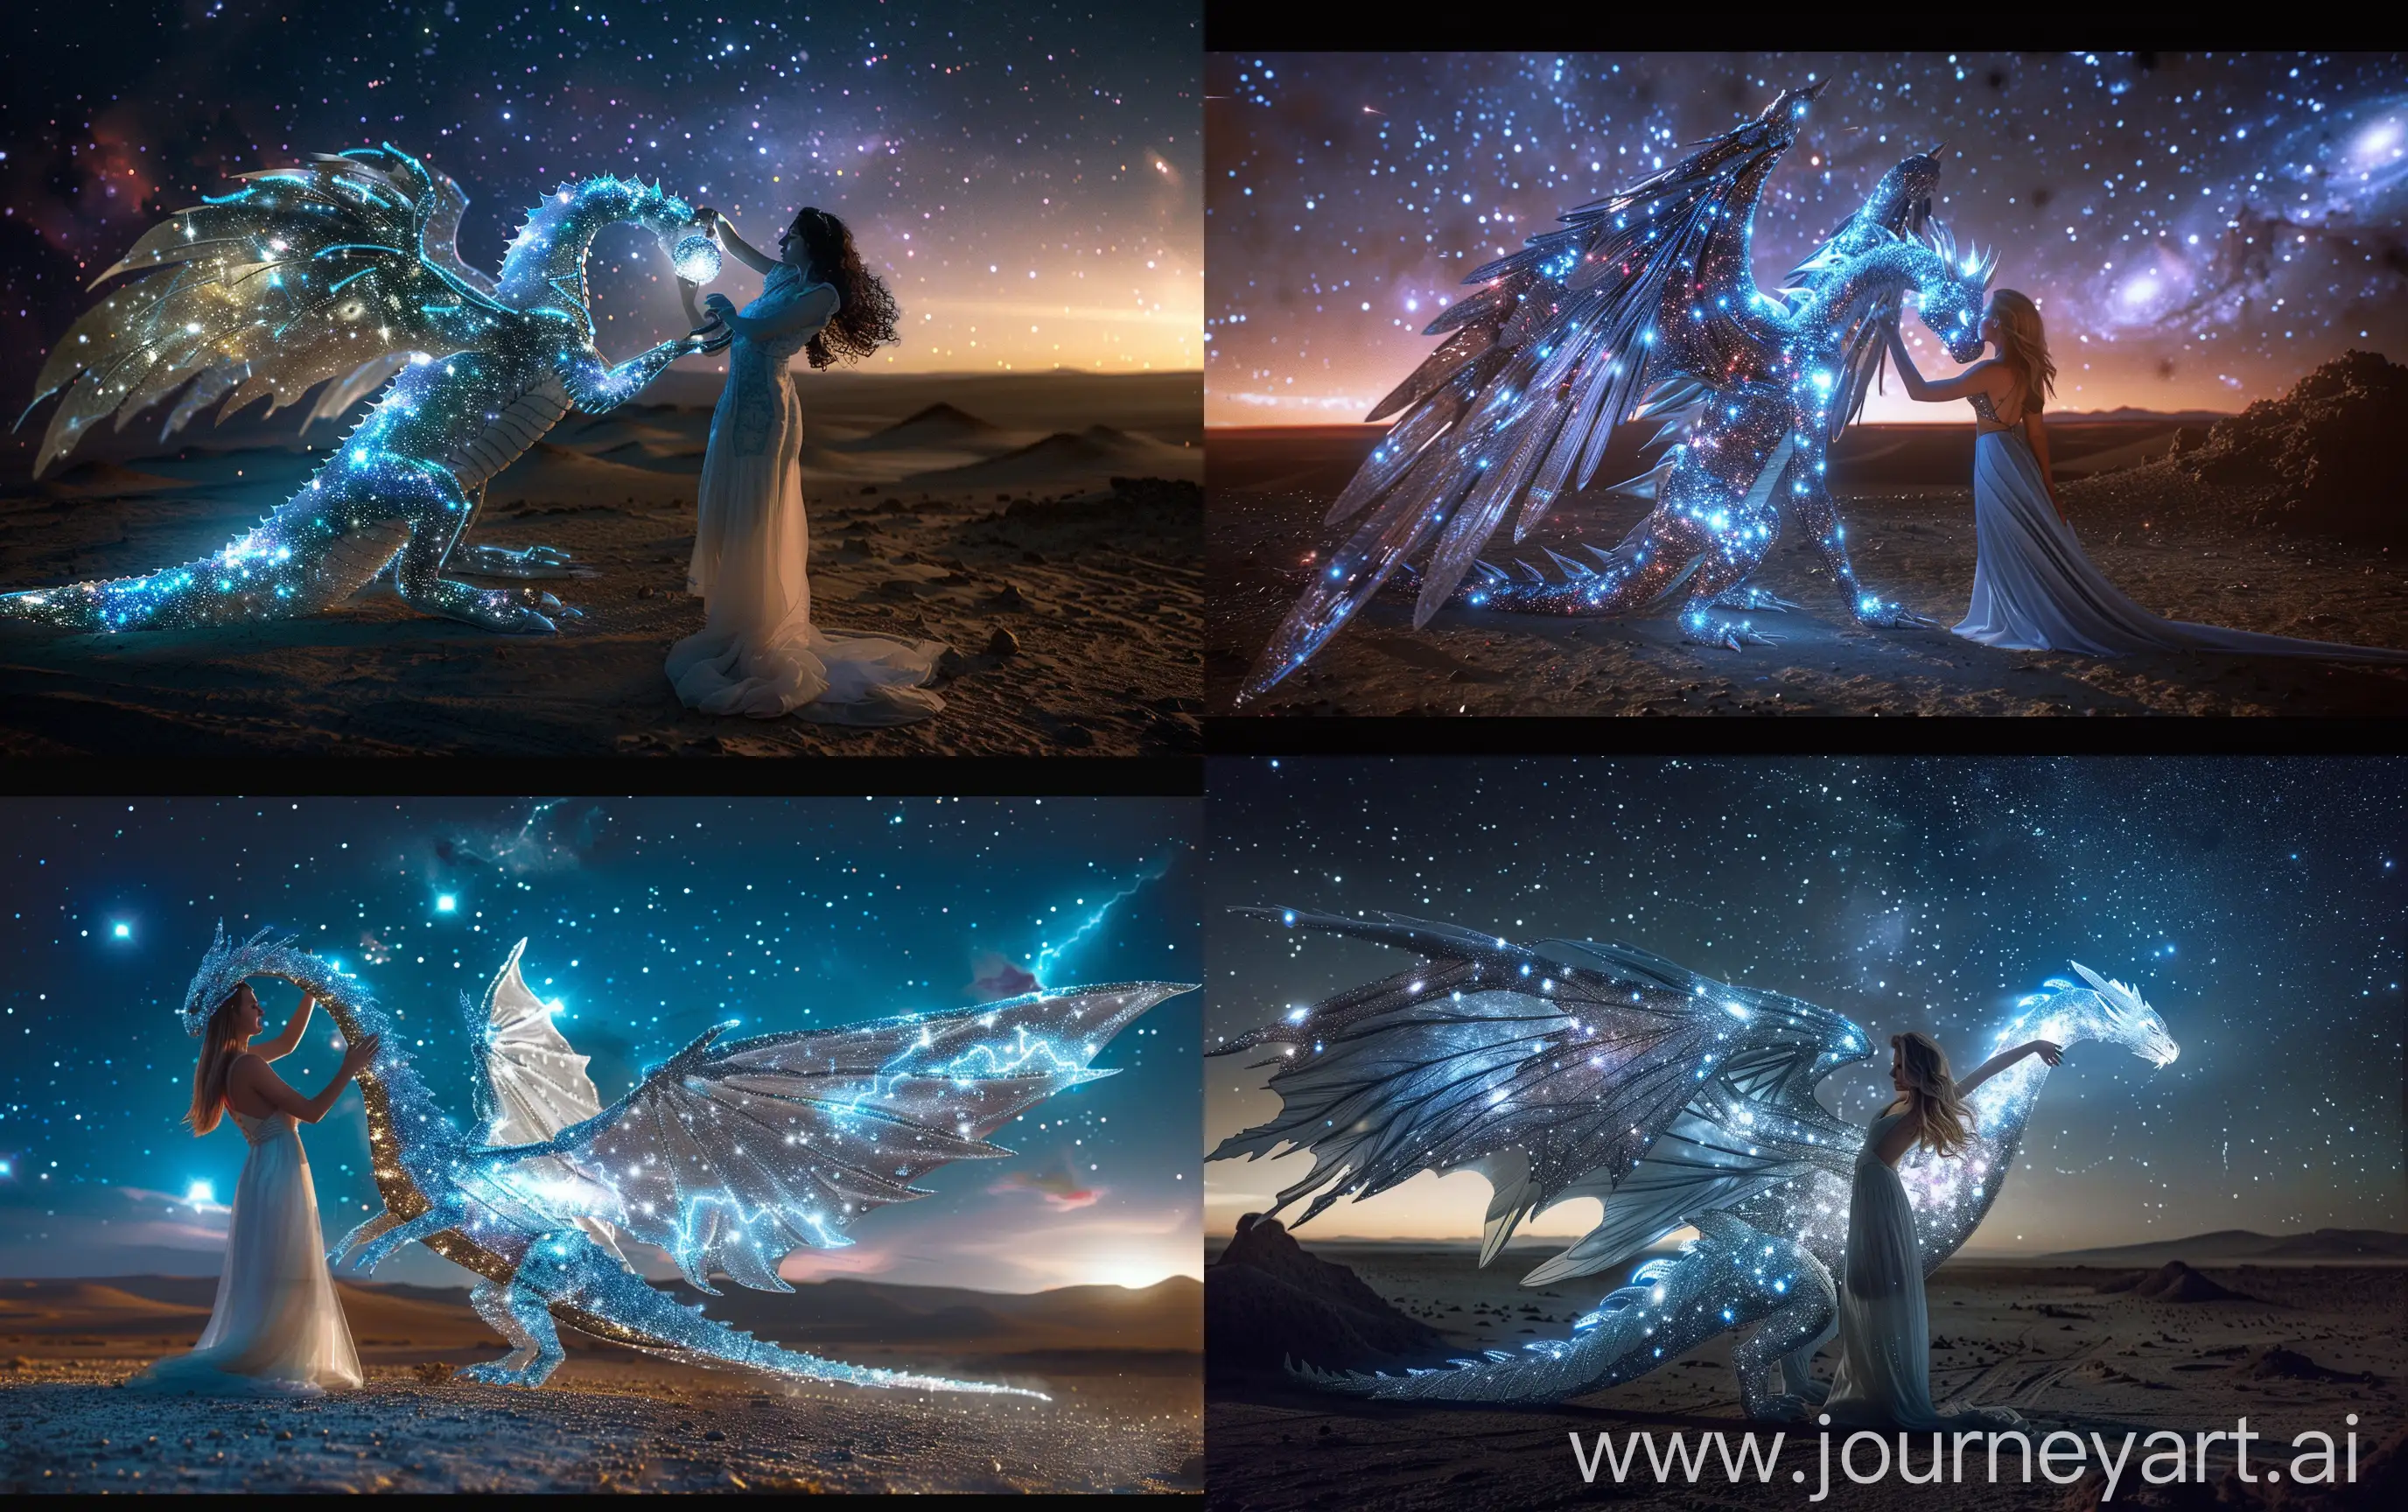 The winged space dragon, body is made of shining galaxies and stars, beautiful female model touches the dragon, the night dark desert with small hills, in the sky is deep space with bright nebulas, realistic, Kodak 35mm shot --ar 16:10